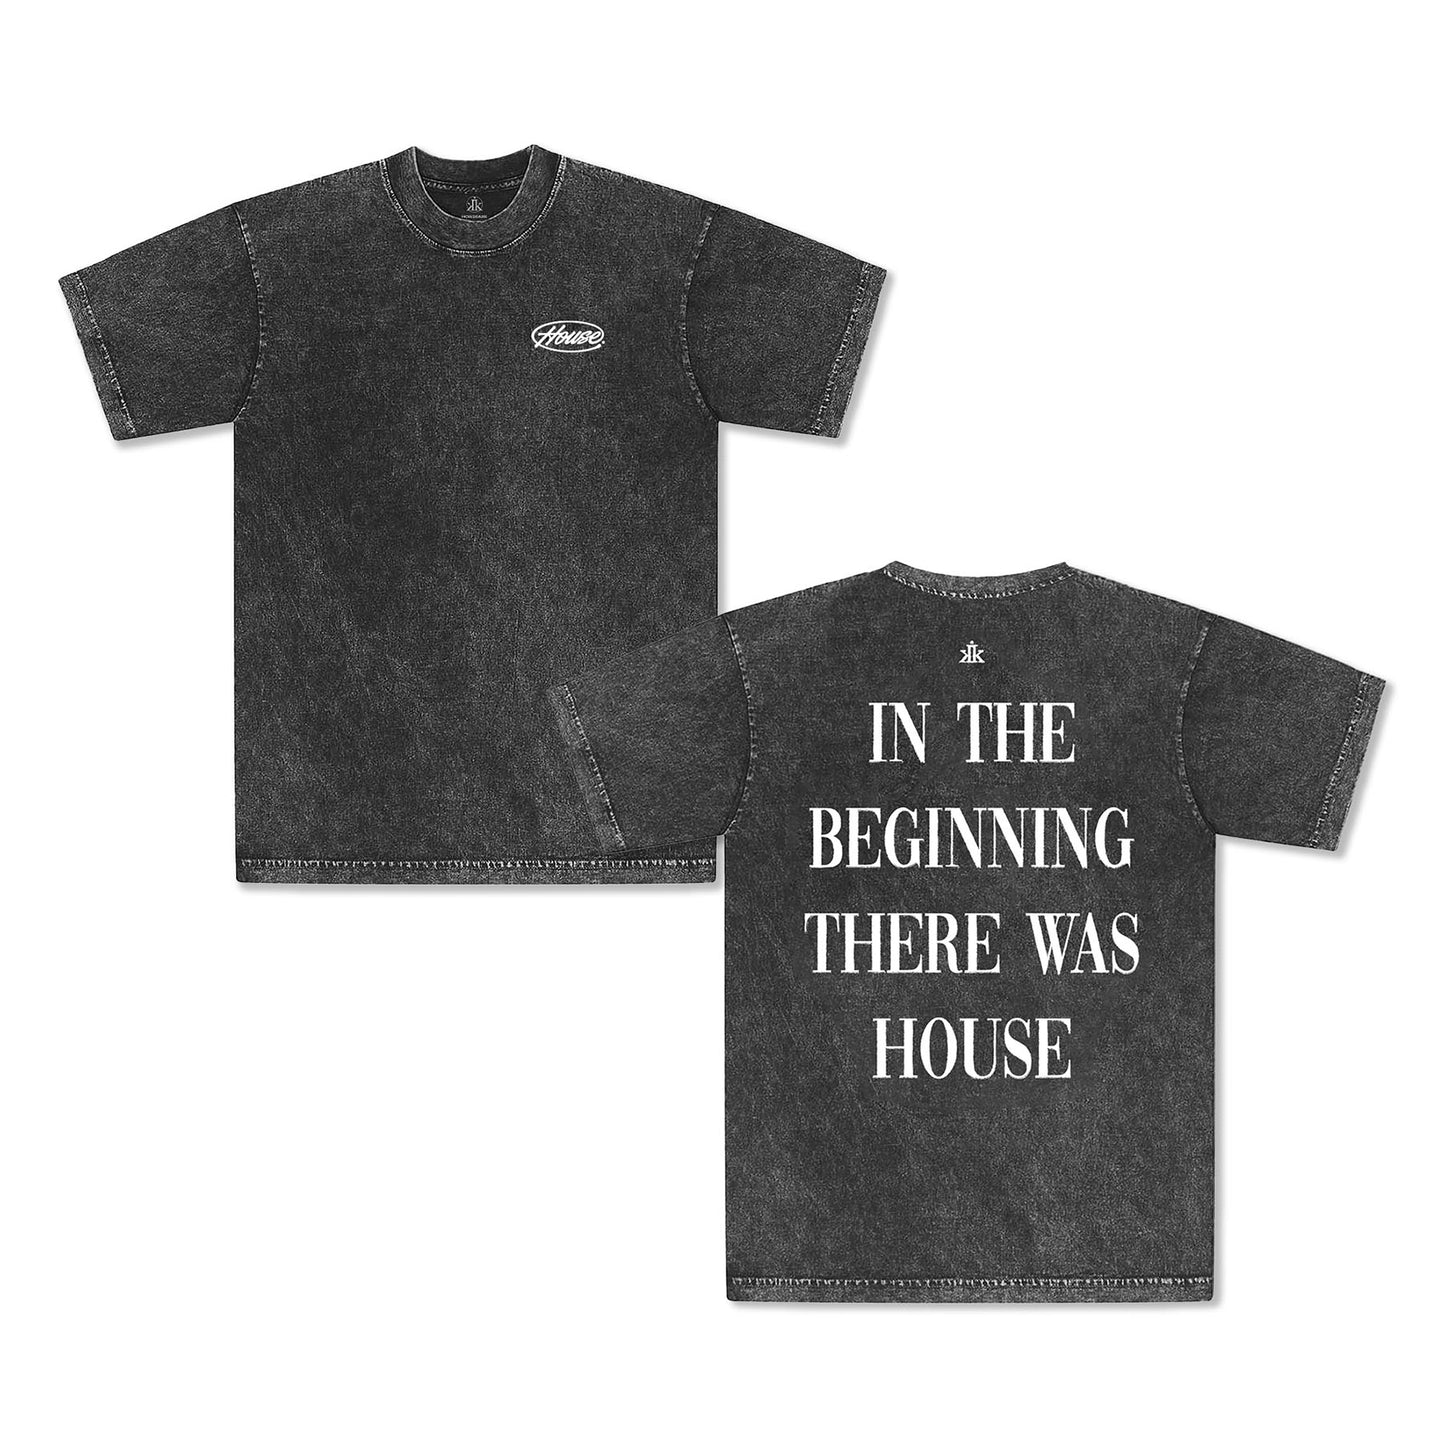 In The Beginning...[House] Tee / Carbon Black - IKendoit.Shop